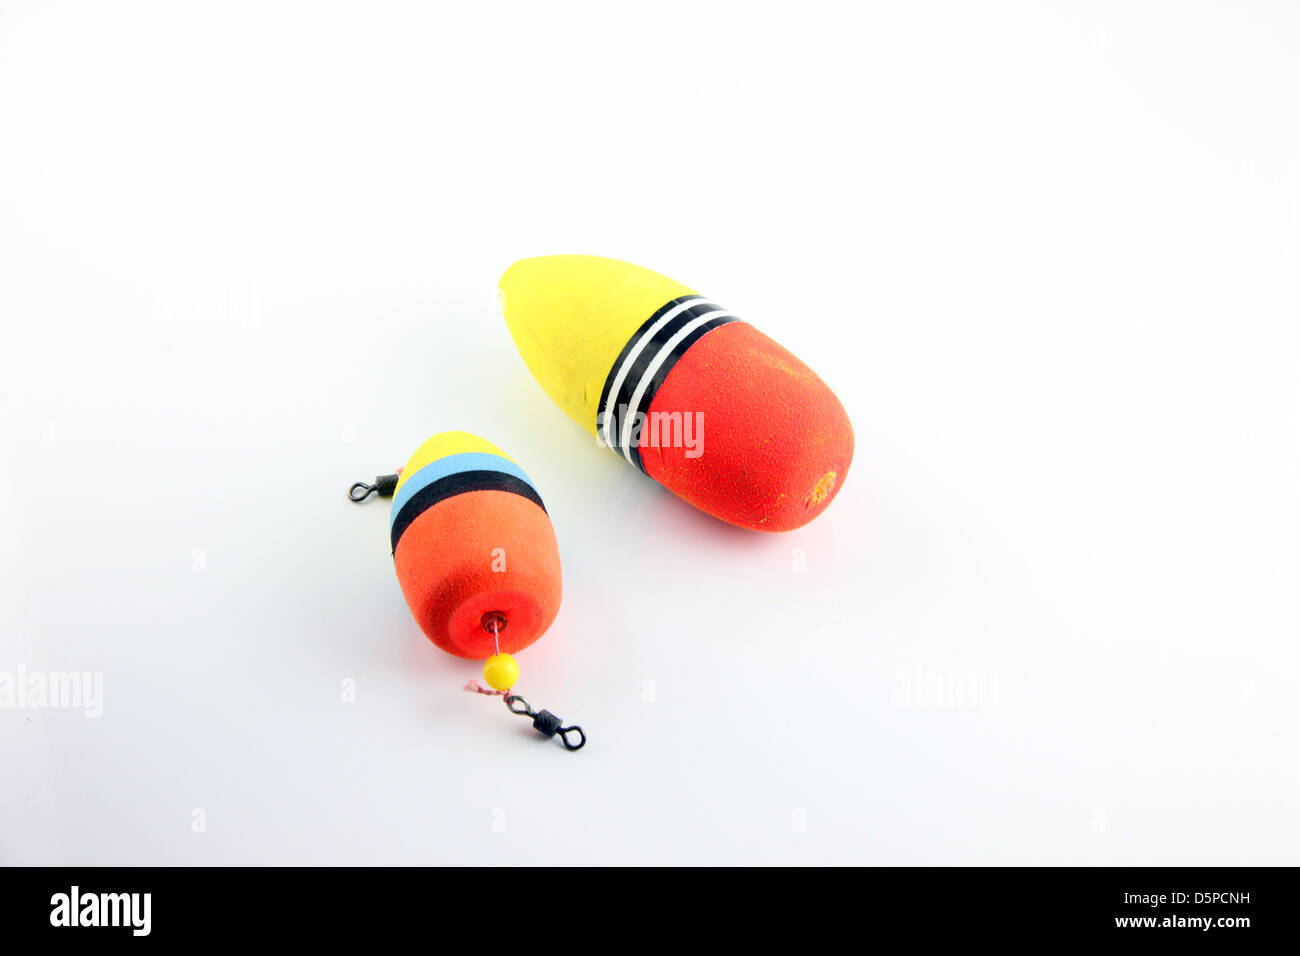 Focus The Buoy for fishing on white Background. Stock Photo